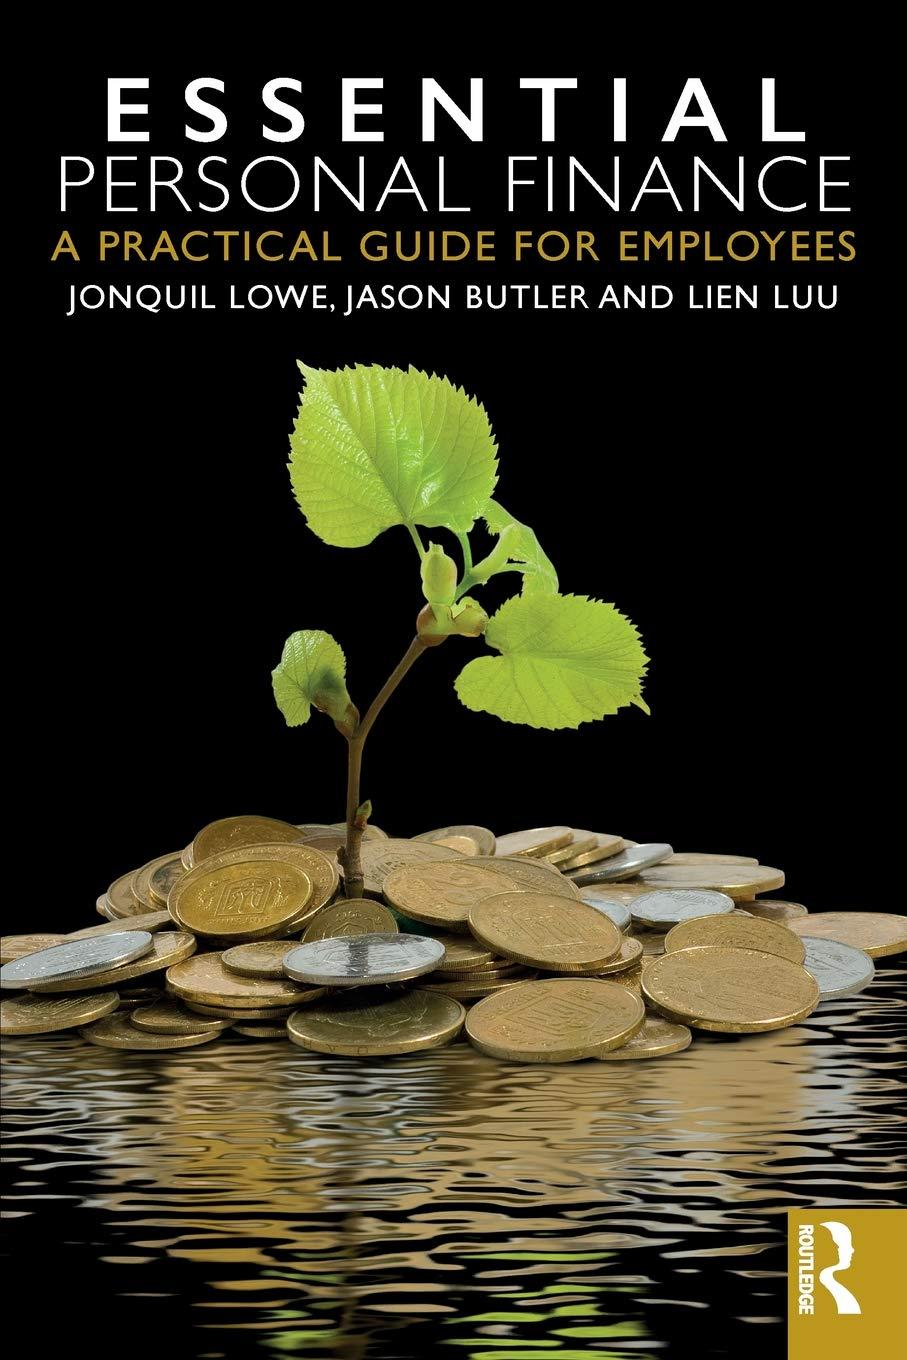 essential personal finance a practical guide for employees 1st edition jonquil lowe, jason butler, lien luu